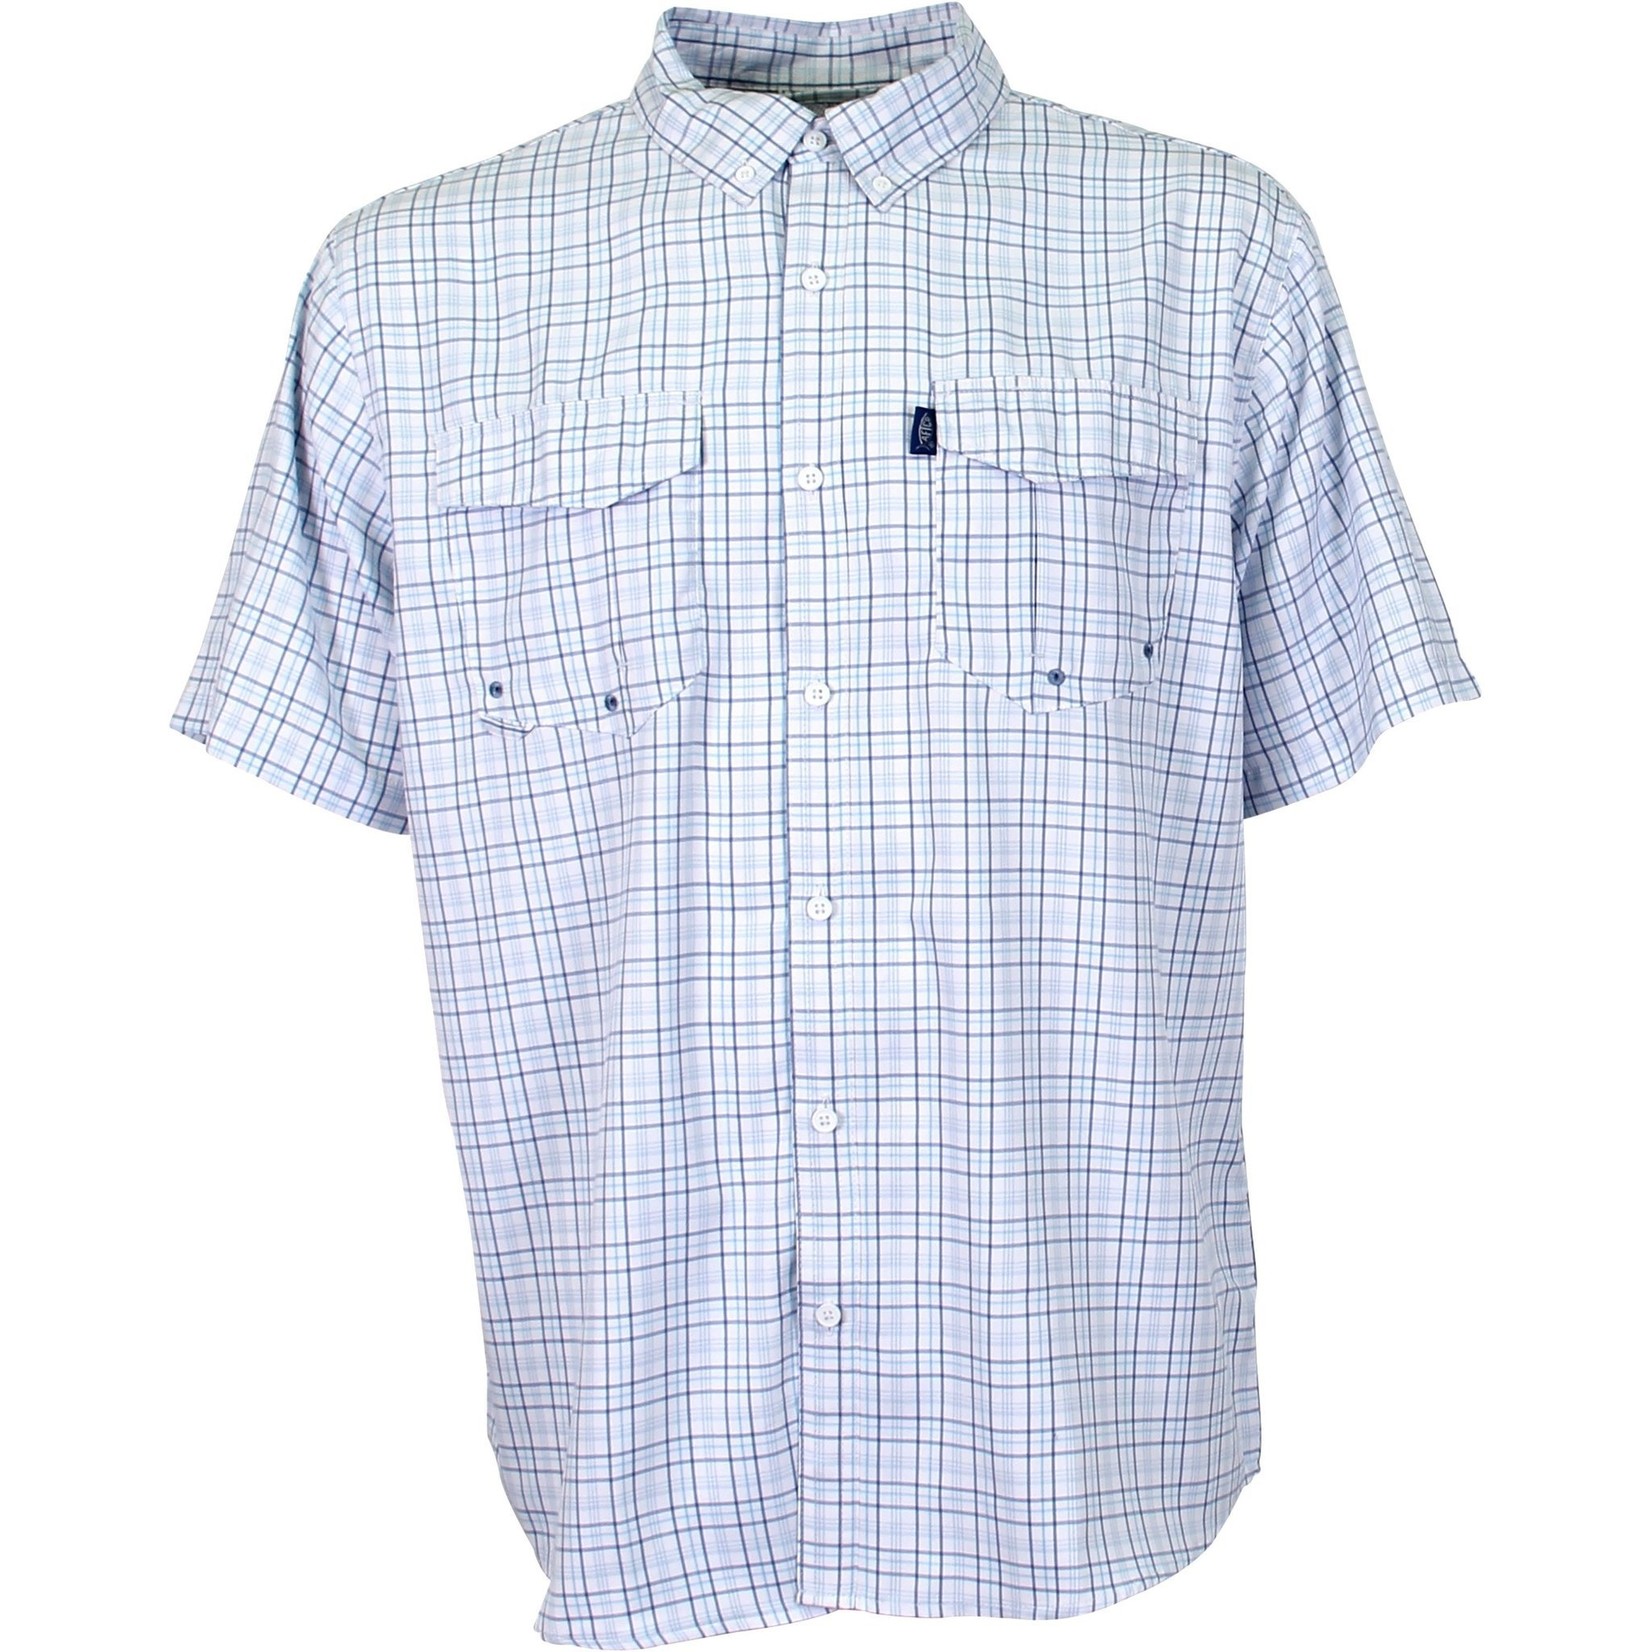 AFTCO Performance Intersection Short Shirt